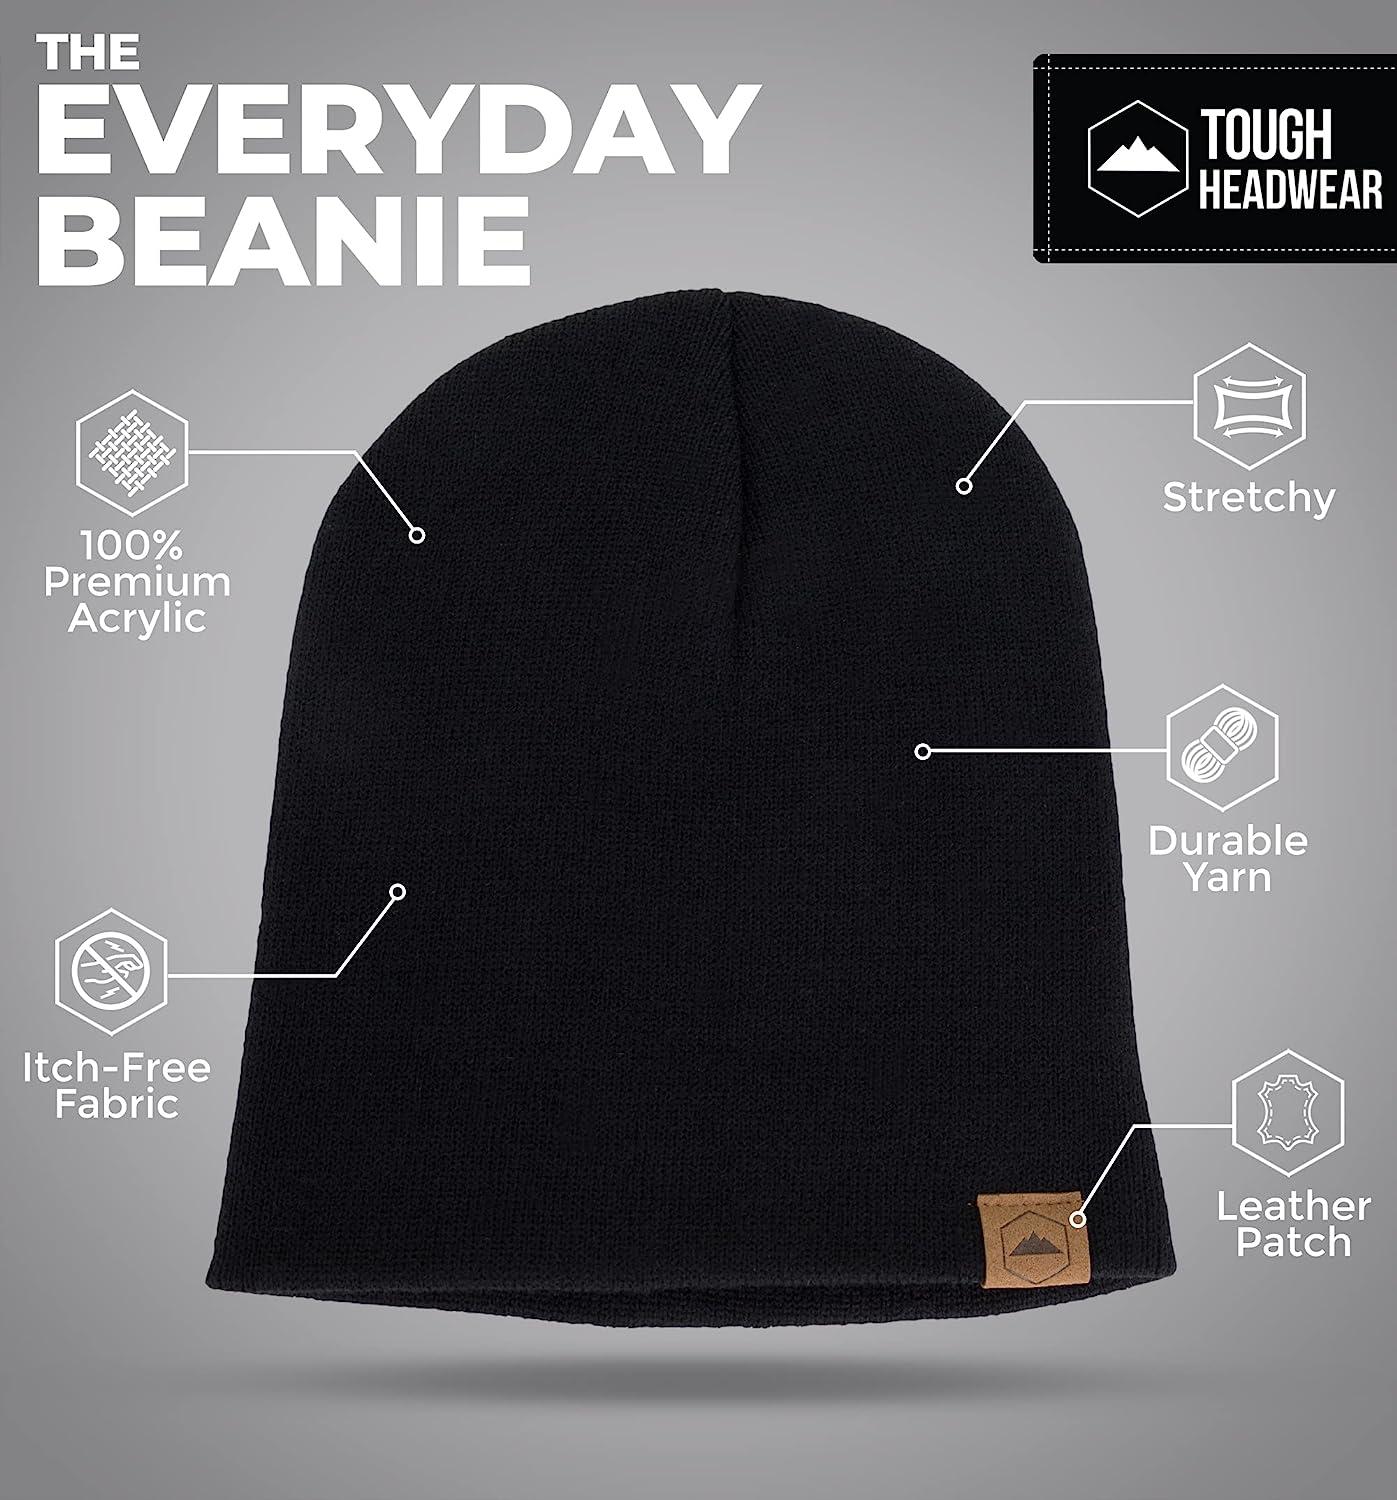 Tough Headwear Knit Beanie Weather Black - Cap Hat, for Cap Men Skate Stocking Ribbed Size Toboggan Warm Women One Cold for Hat - and Winter